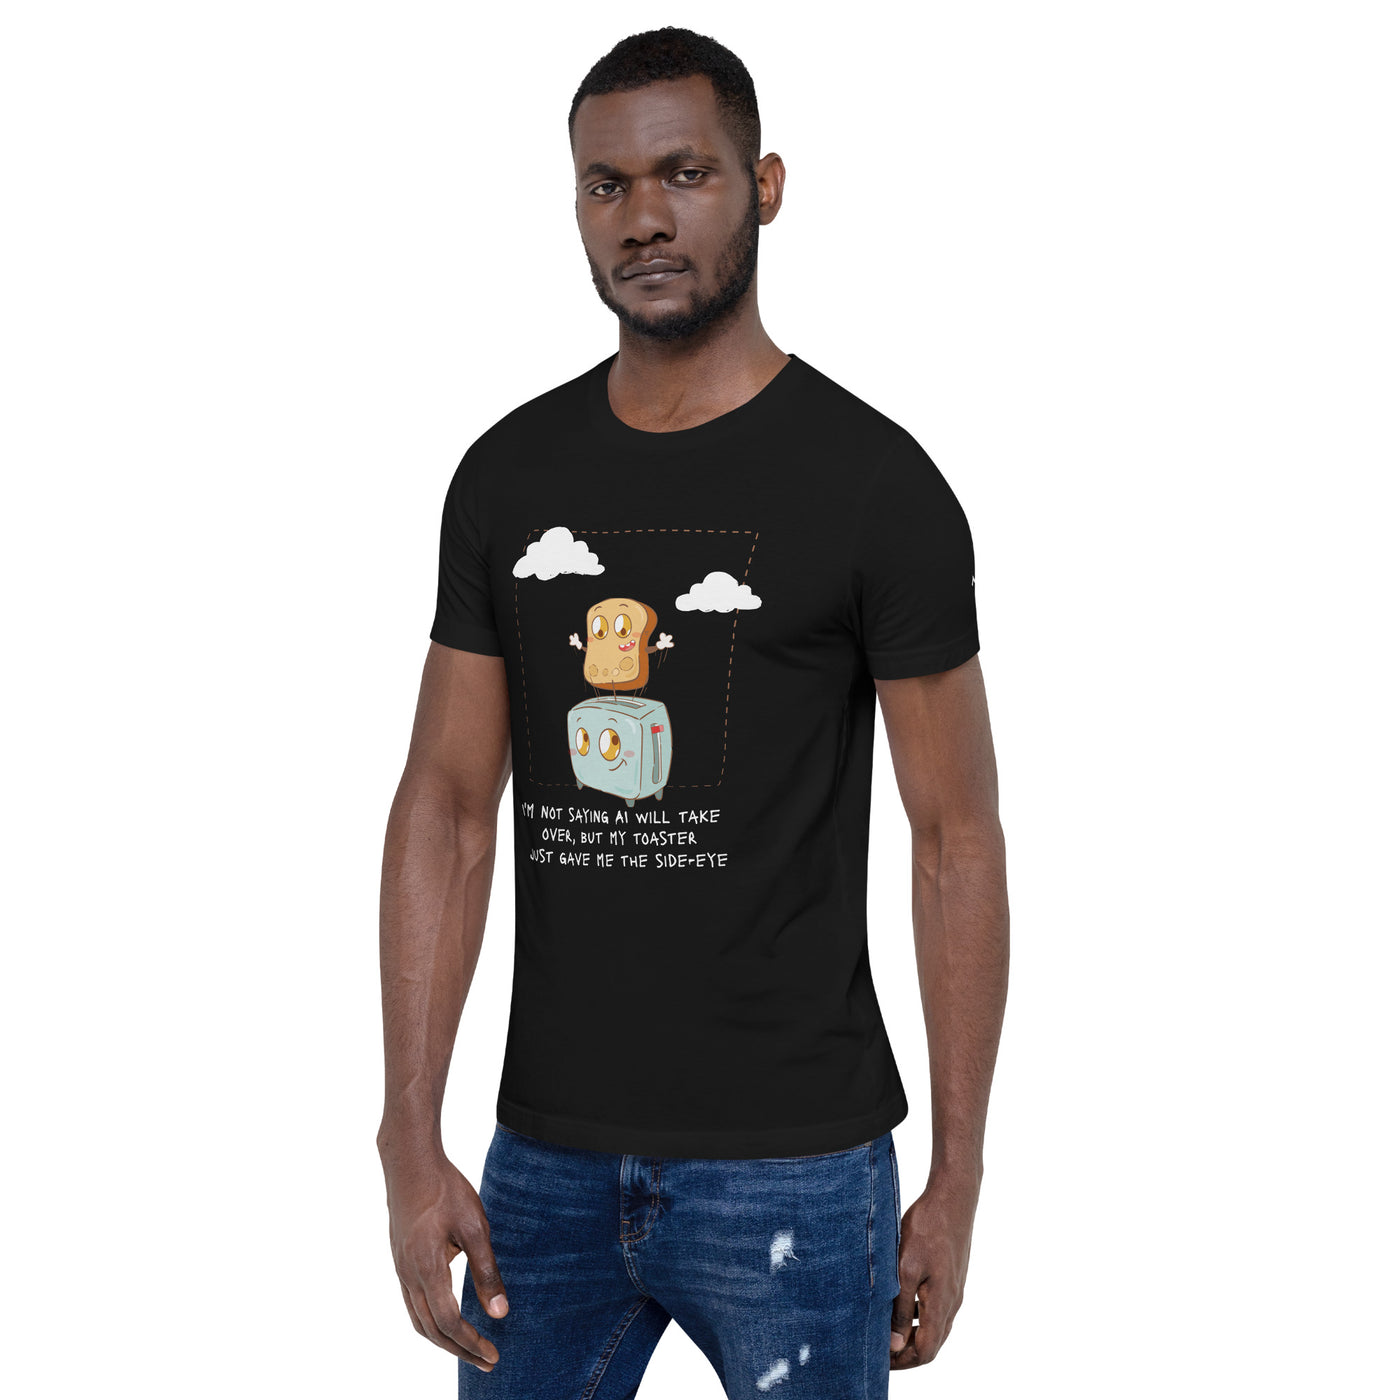 I'm not Saying AI will take over but my toaster - Unisex t-shirt